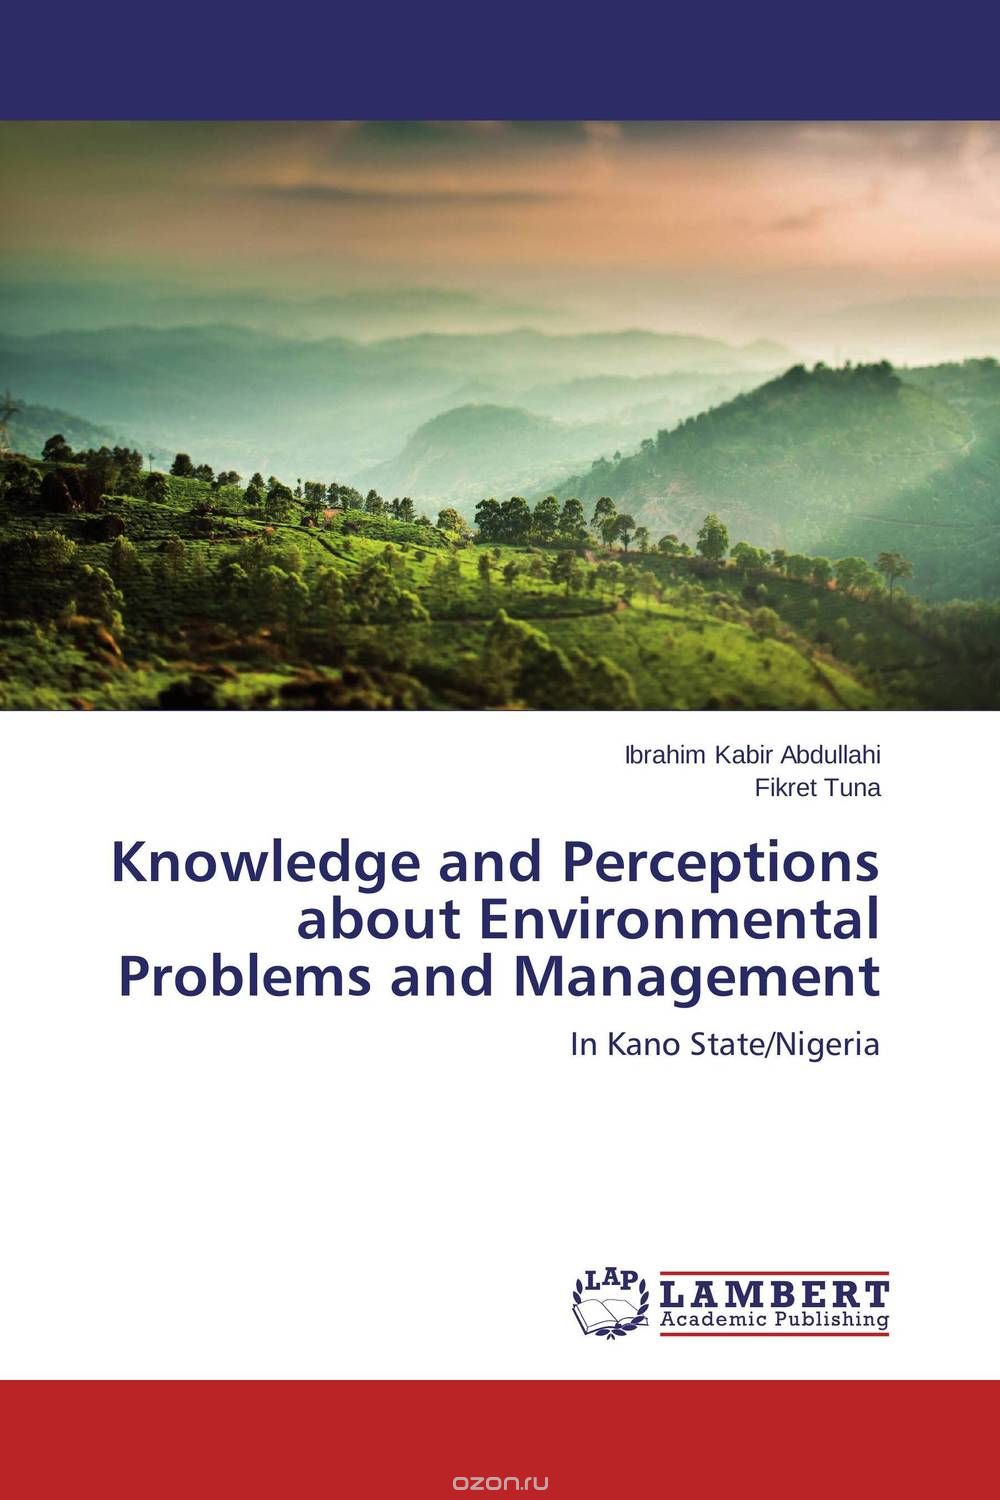 Скачать книгу "Knowledge and Perceptions about Environmental Problems and Management"